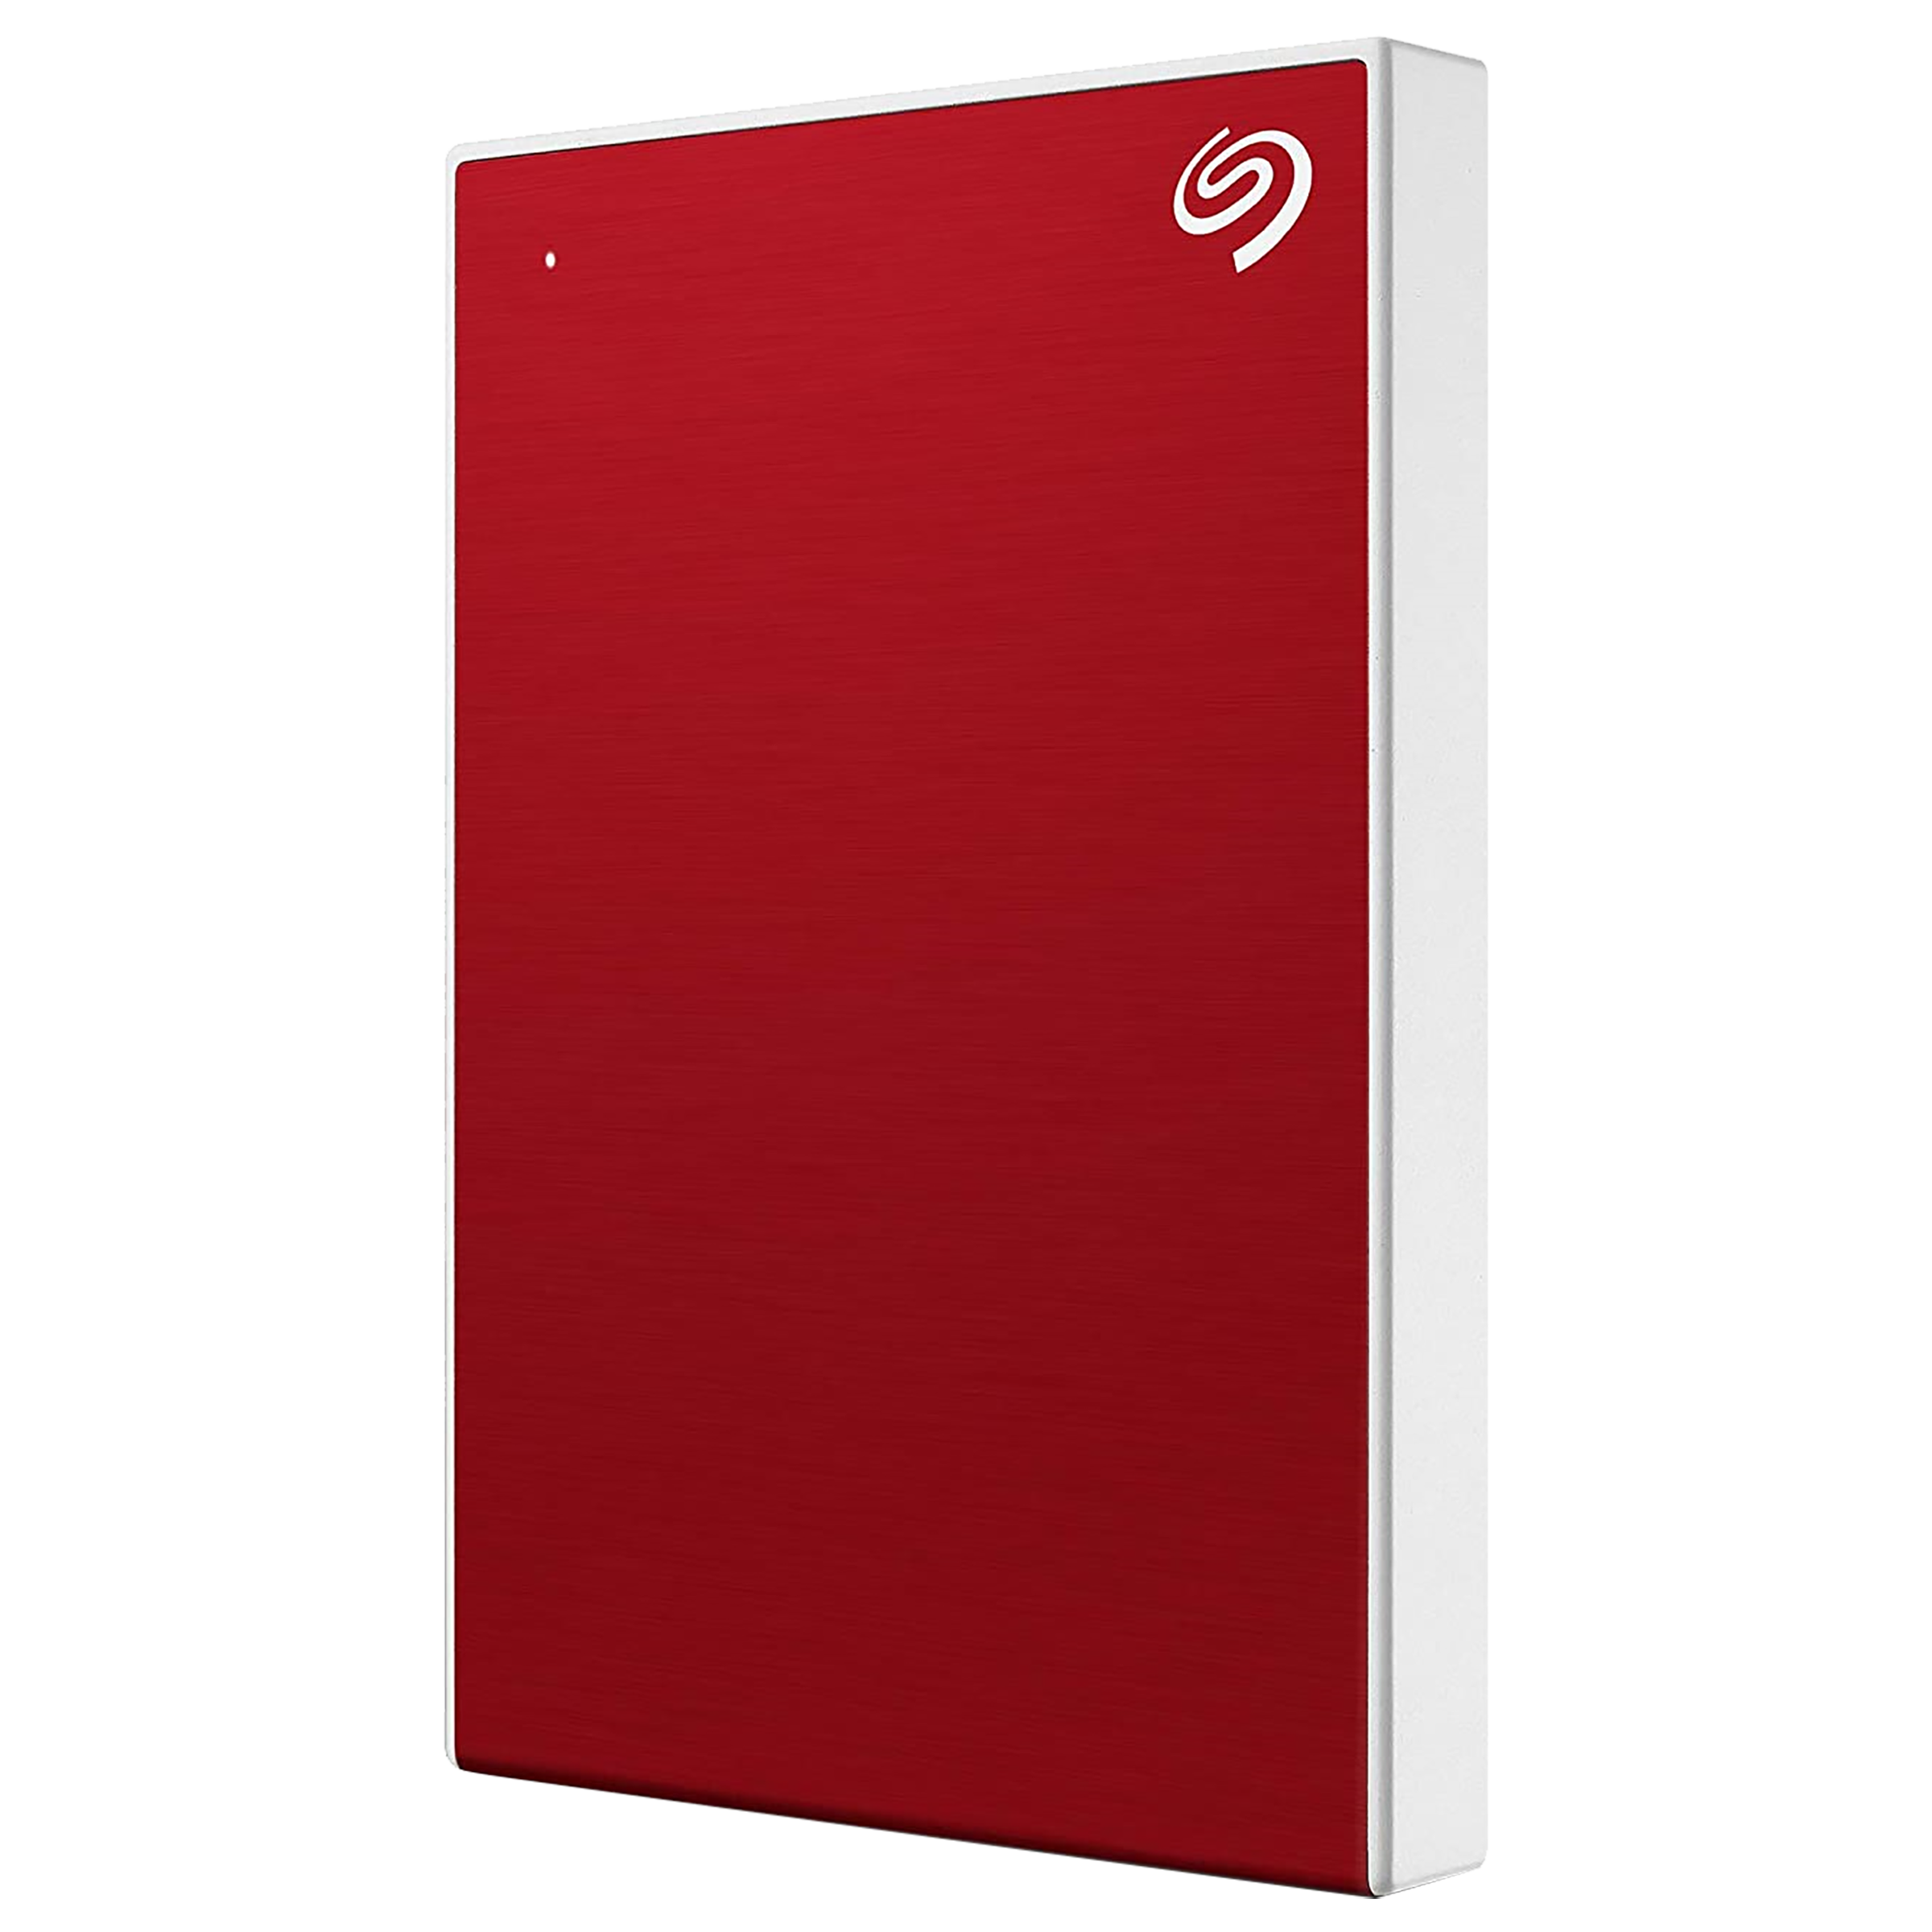 Seagate One Touch 1TB USB 3.0 Hard Disk Drive (Easy Data Backup, STKY1000403, Red)